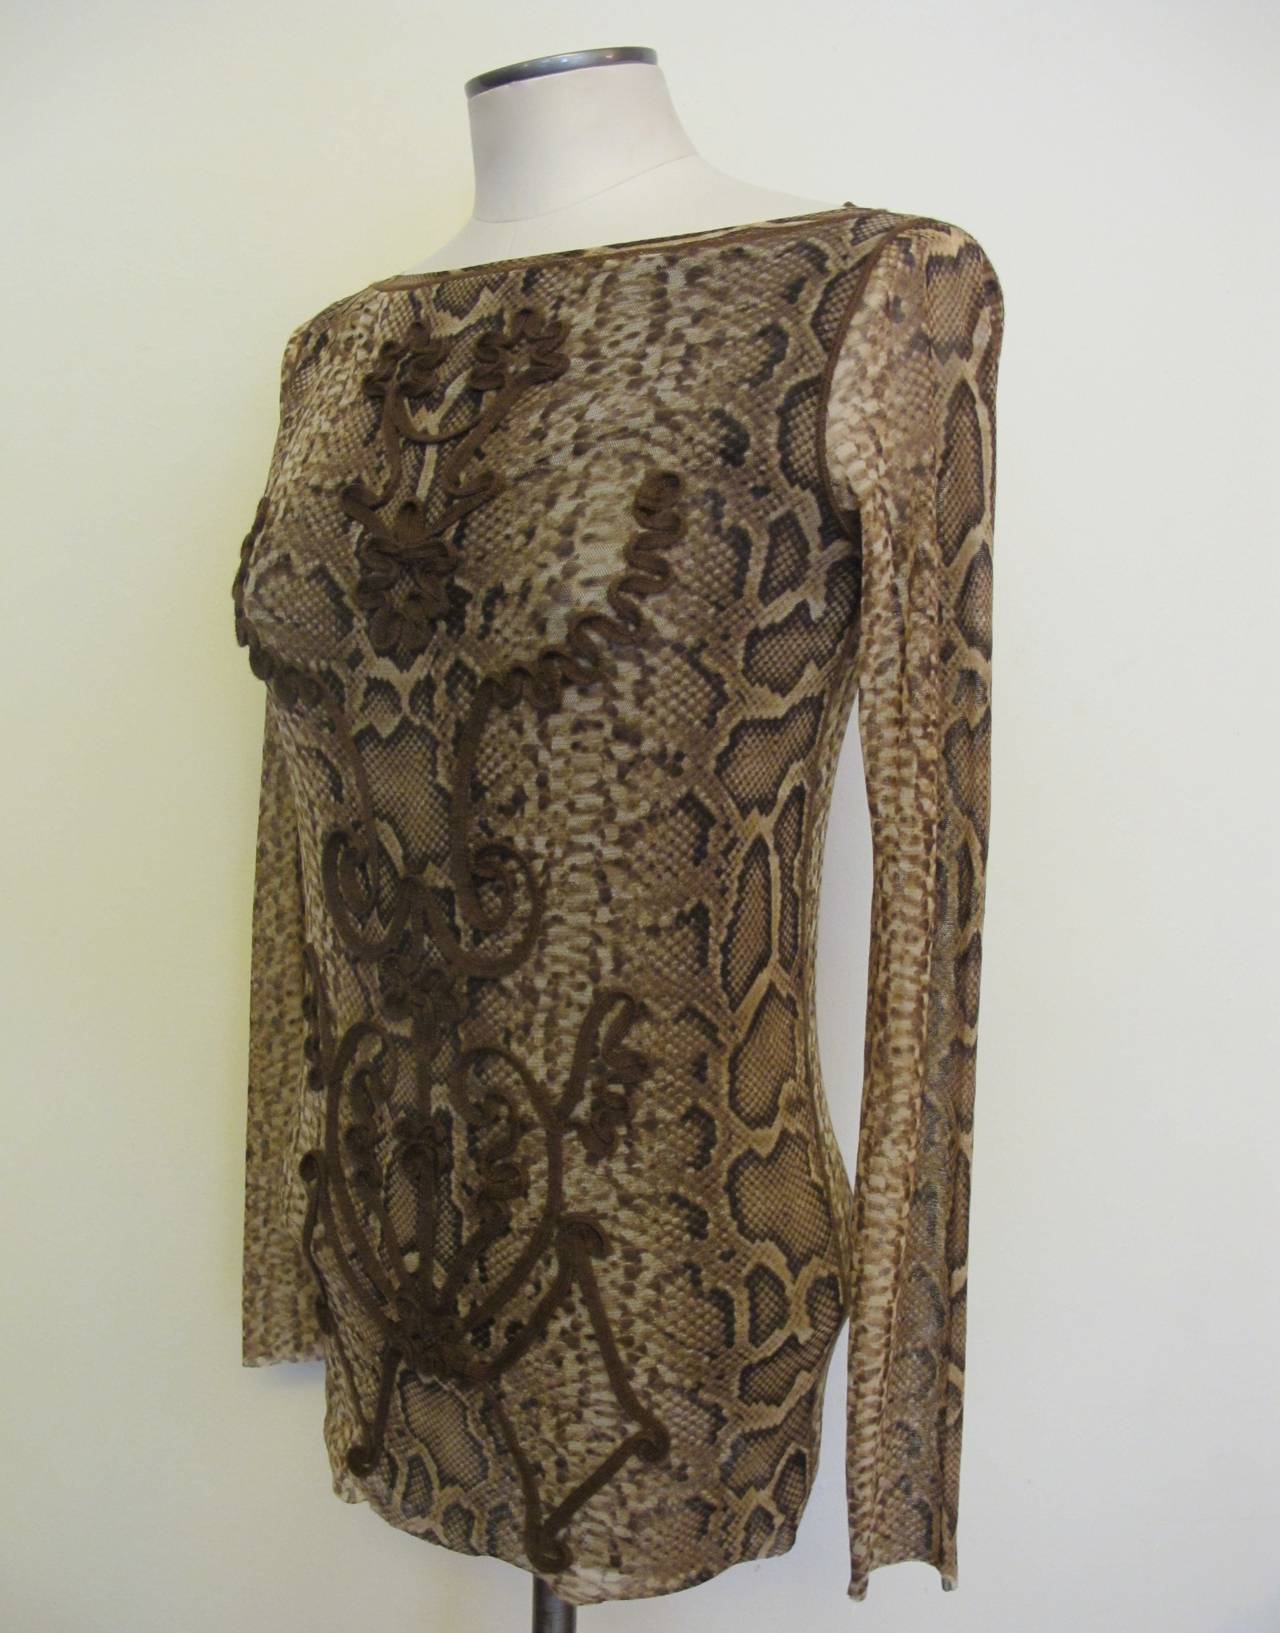 The brown. beige snakeskin blouse has polyester shoe lace trim design from neck to bottom of blouse. There is a 1.5 inch chocolate trim at bottom of blouse. Sleeve length measures 24 inches.